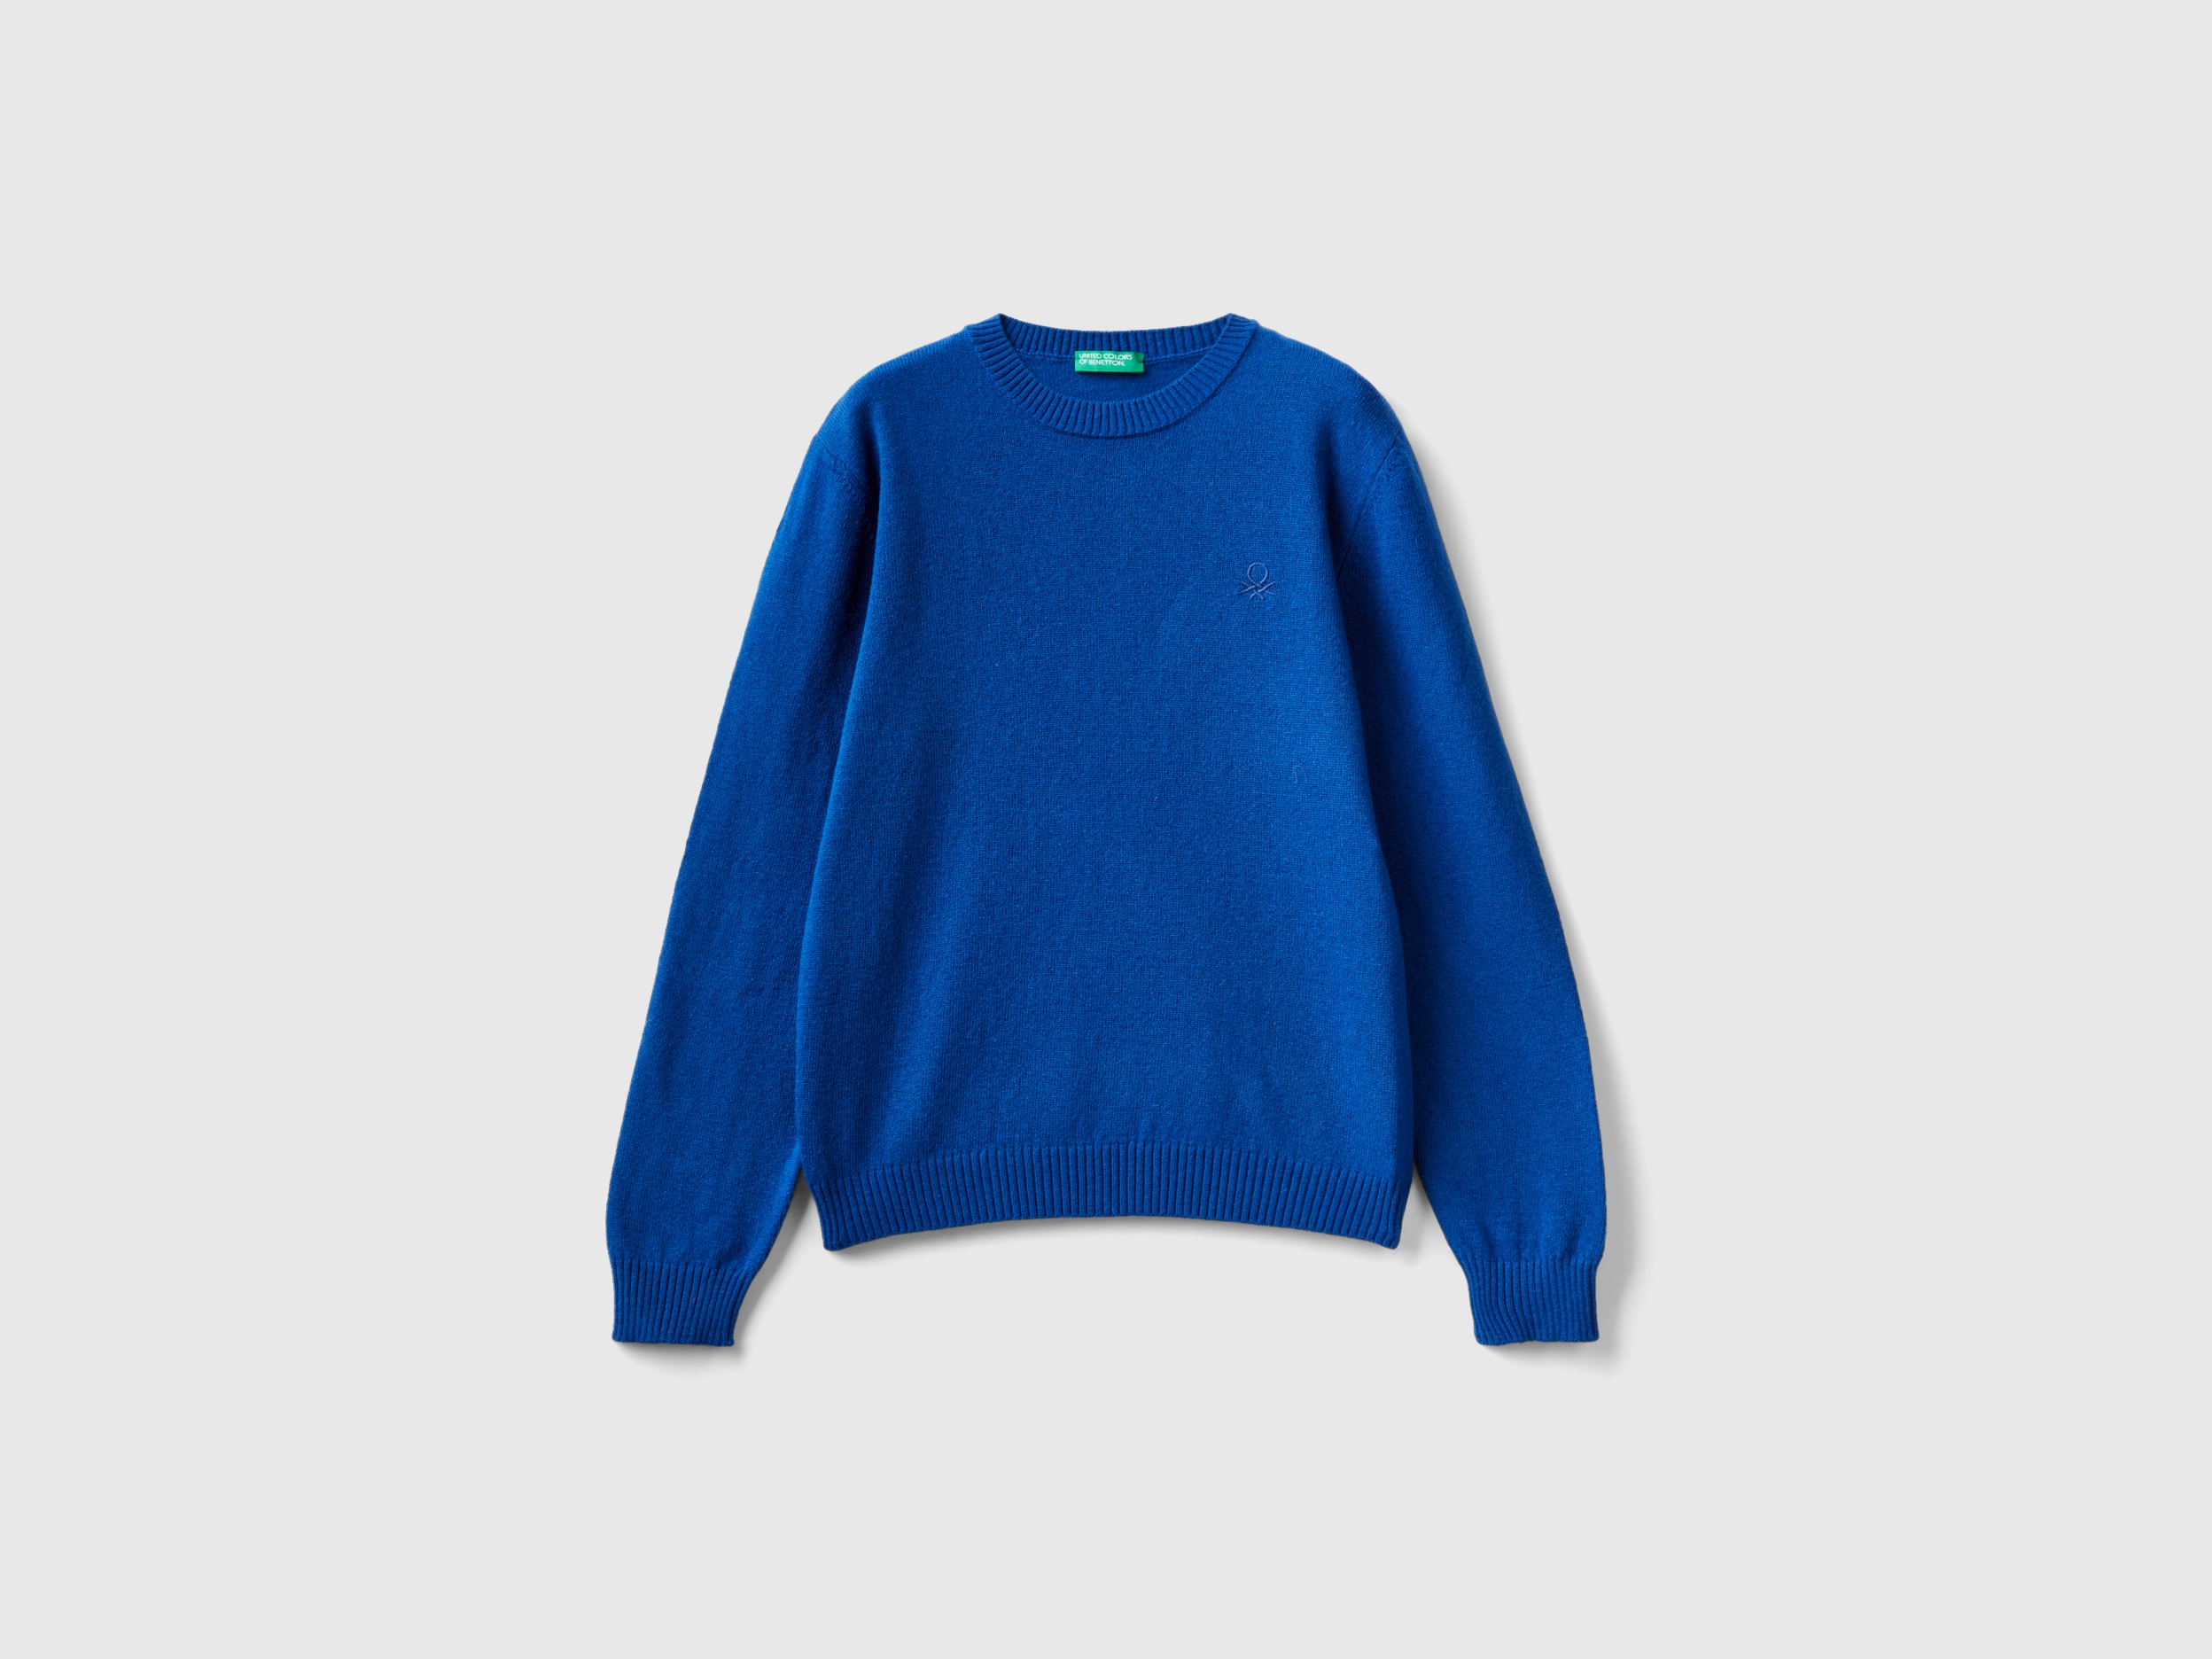 Benetton, Sweater In Cashmere And Wool Blend, size 2XL, Blue, Kids